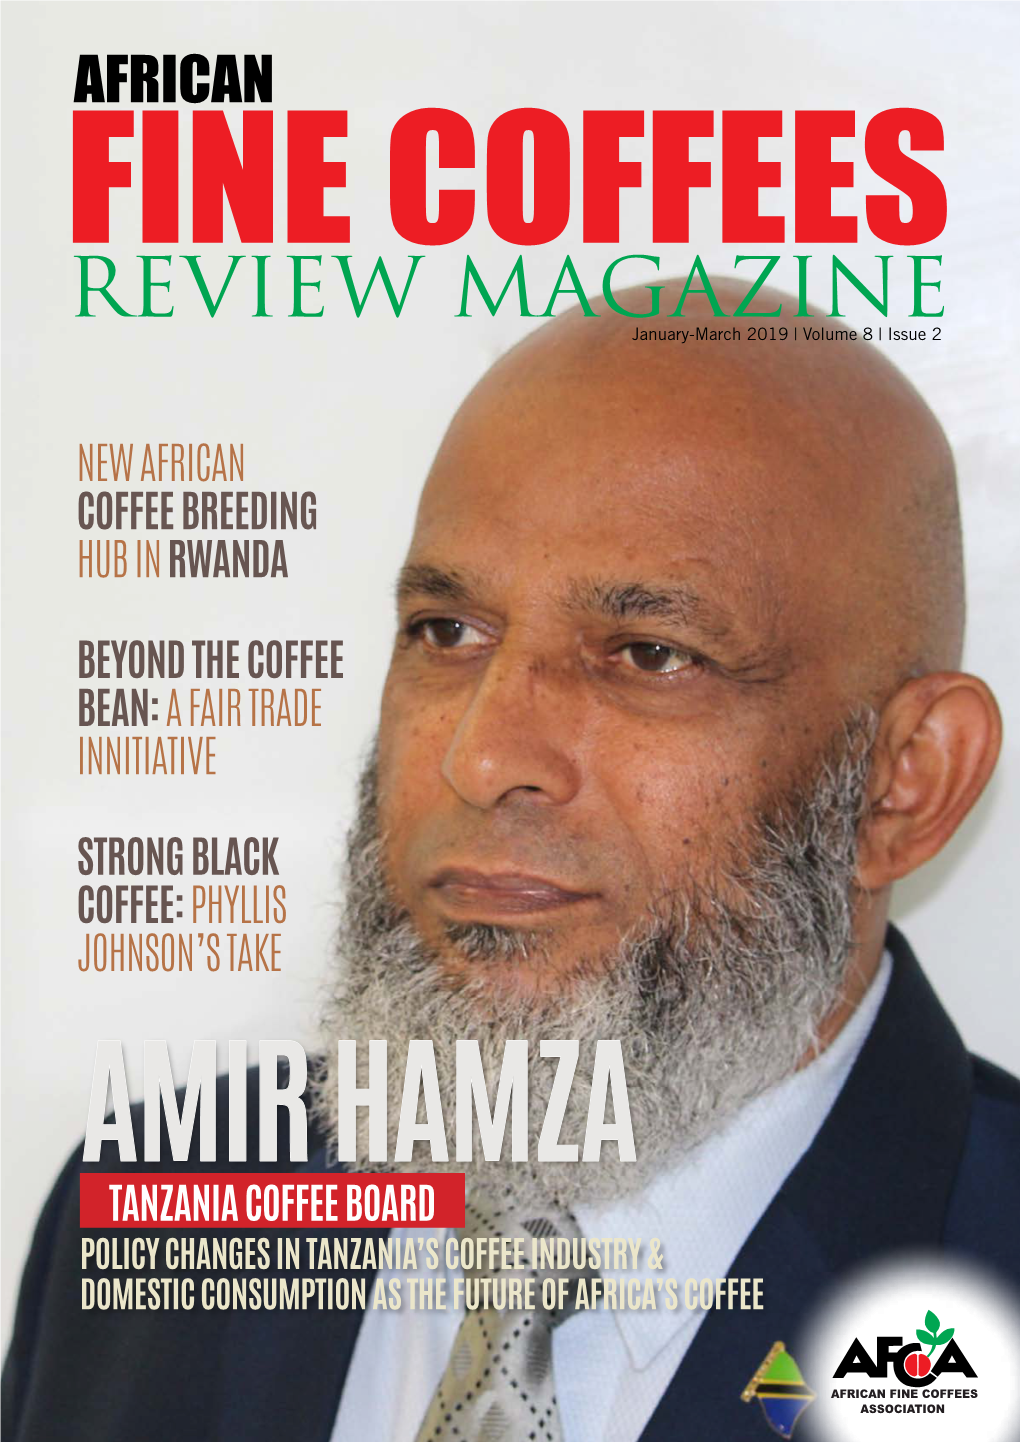 Review Magazine | January-March 2019 | Volume 8 | Issue 2 1 2 African Fine Coffees Review Magazine | January-March 2019 | Volume 8 | Issue 2 13